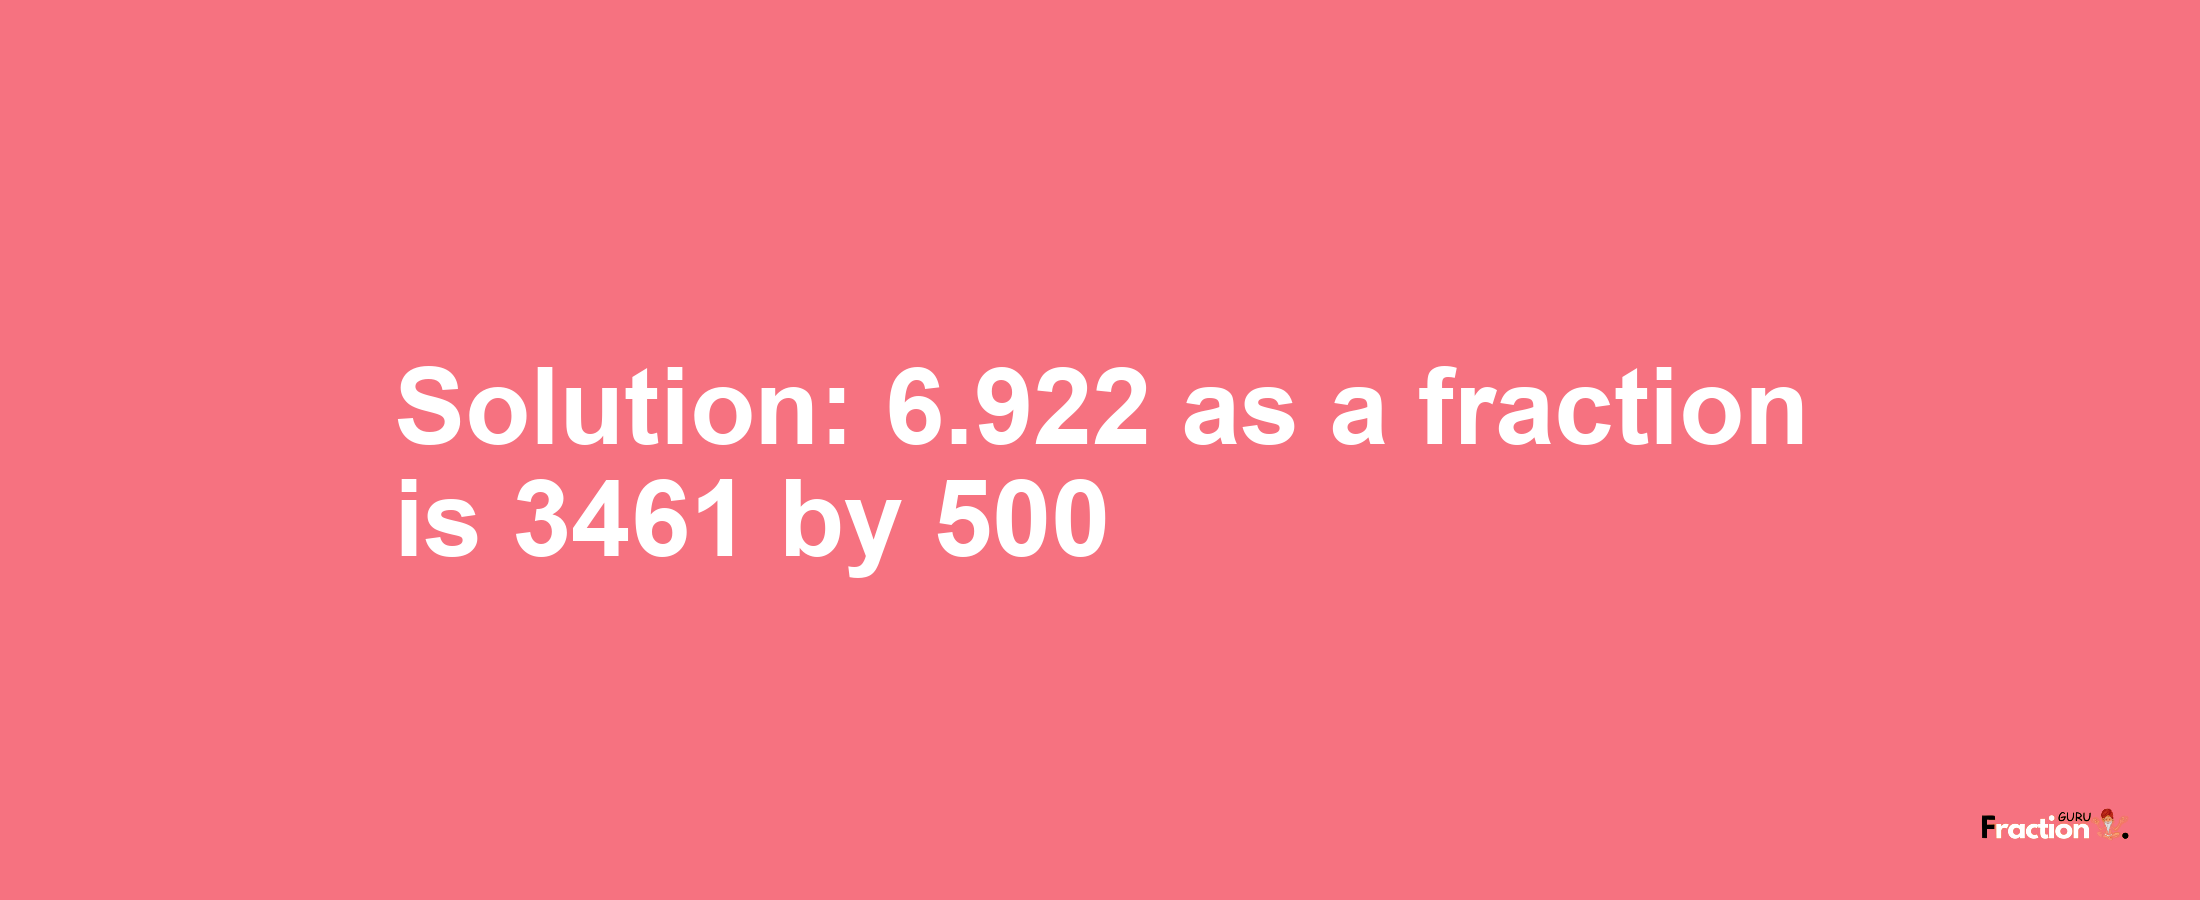 Solution:6.922 as a fraction is 3461/500